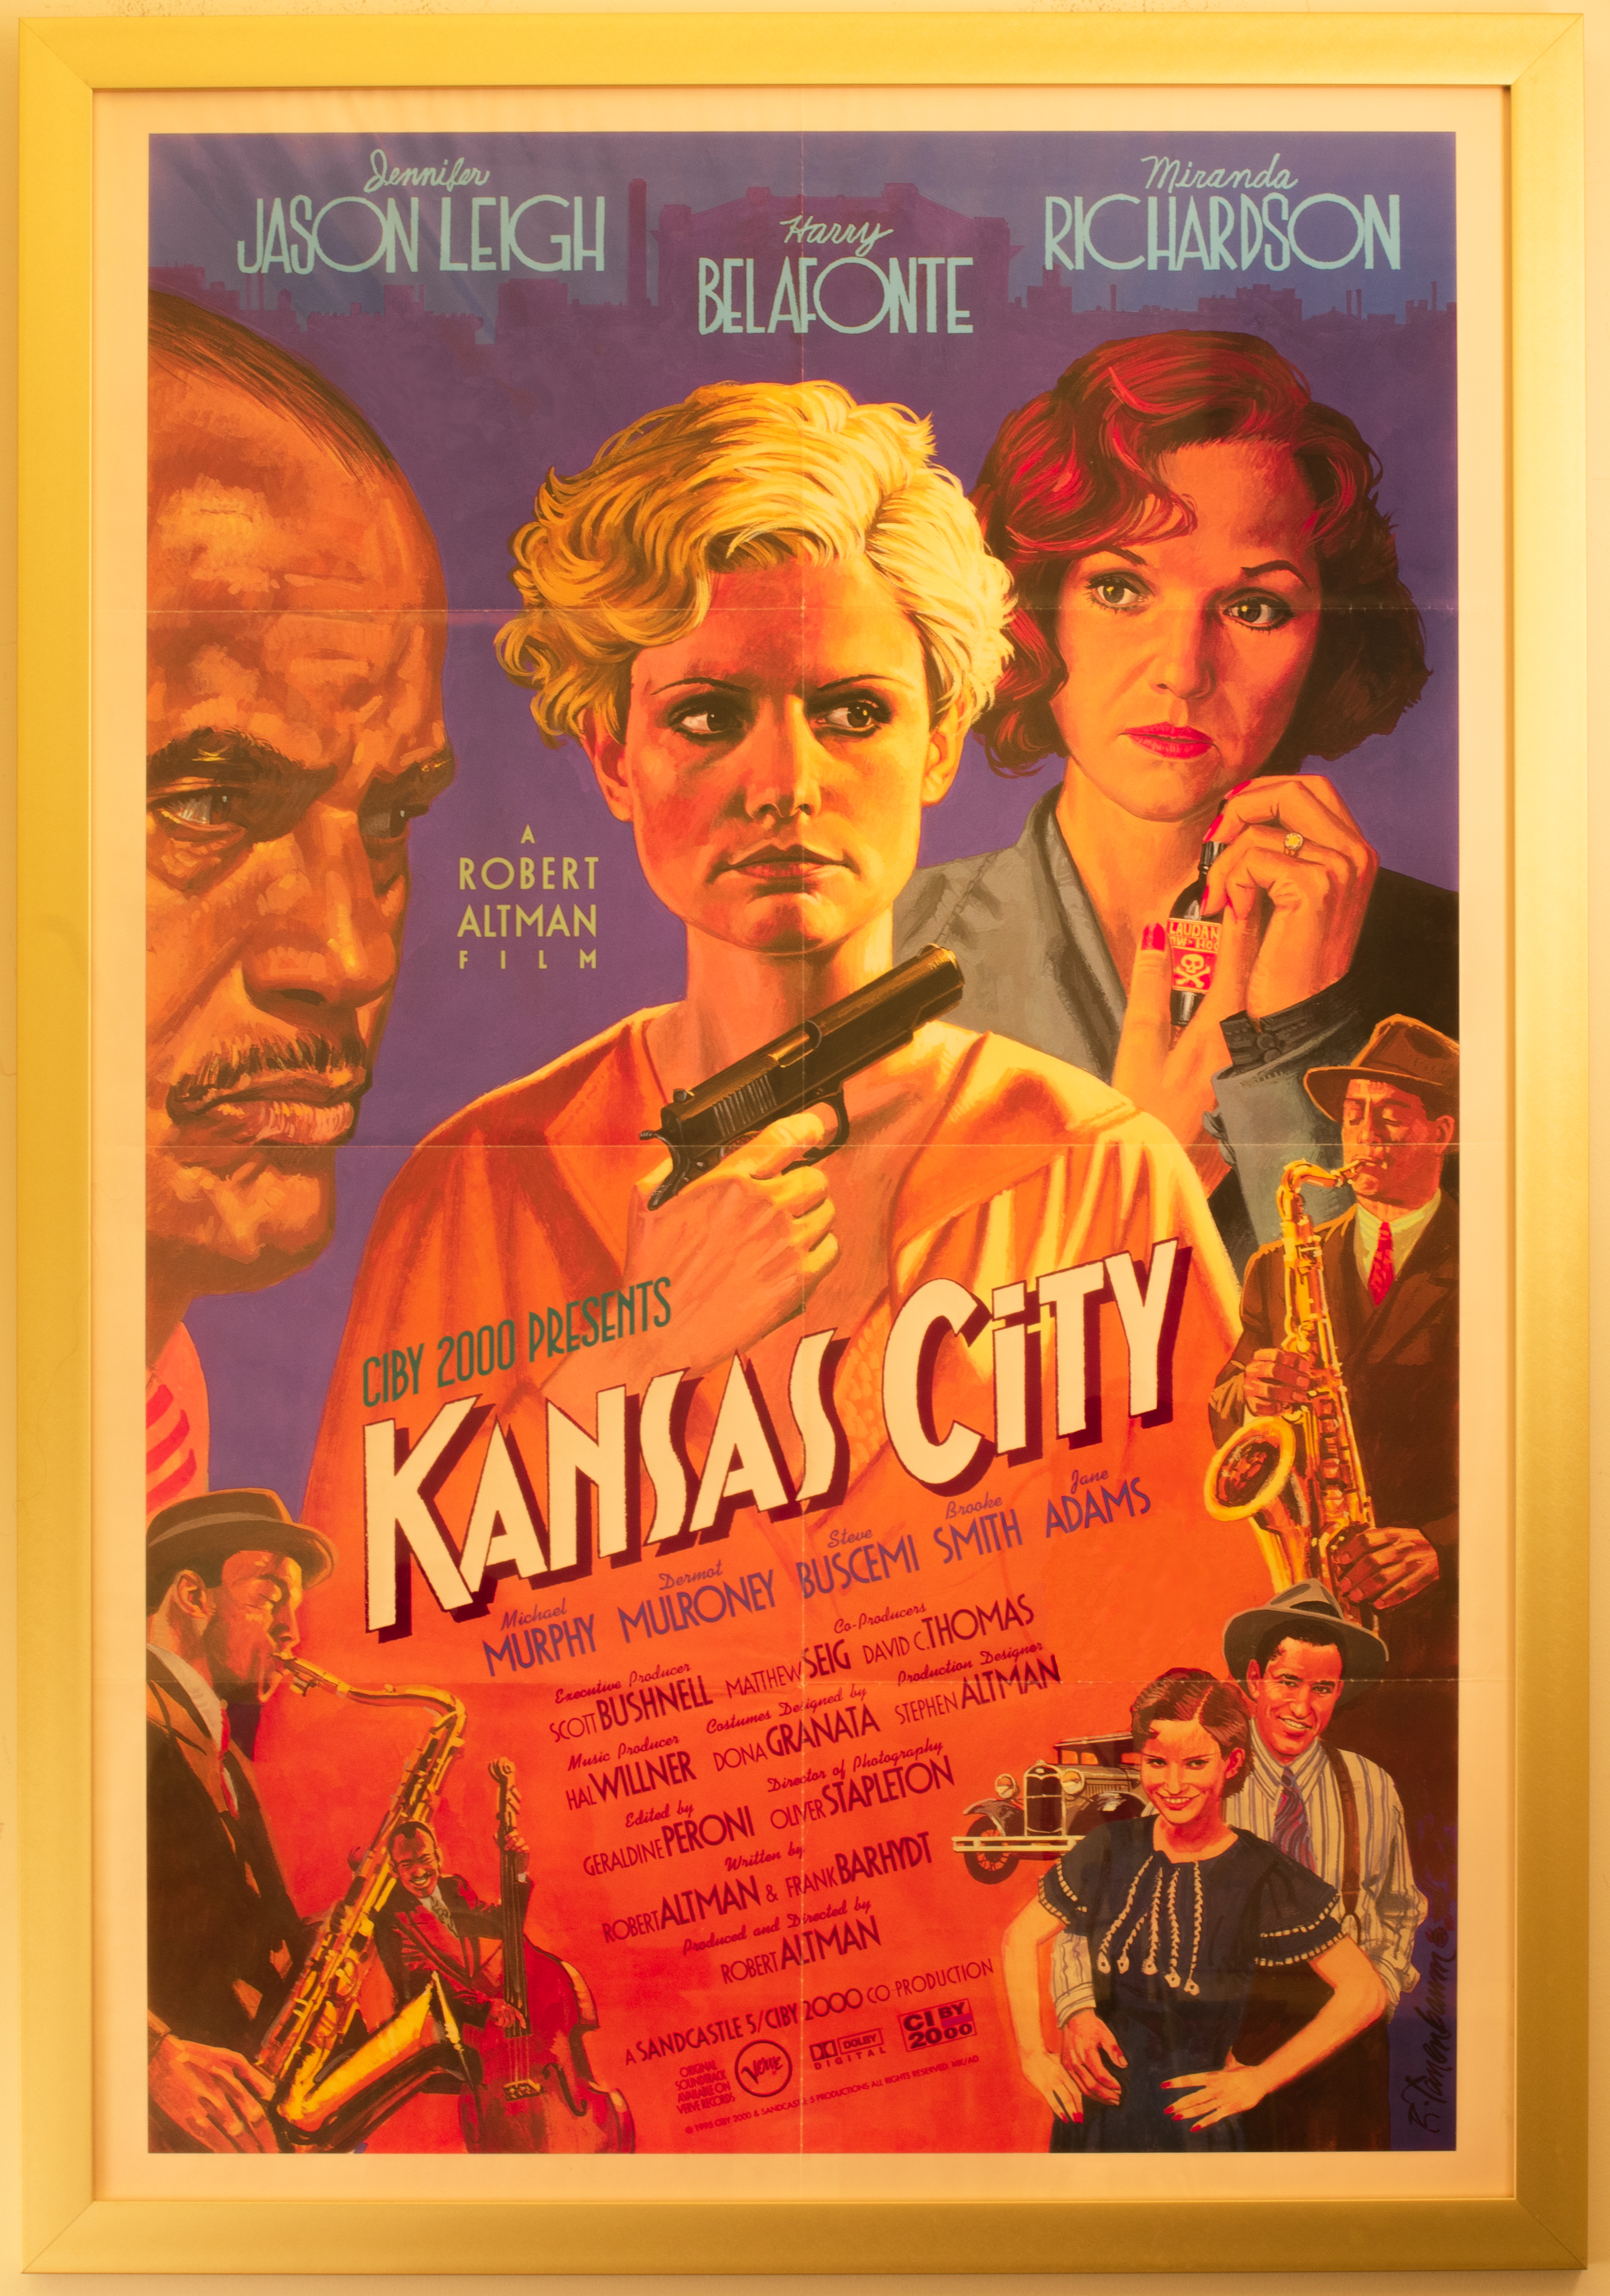 Graphic poster advertisement for the 1996 film titled Kansas City